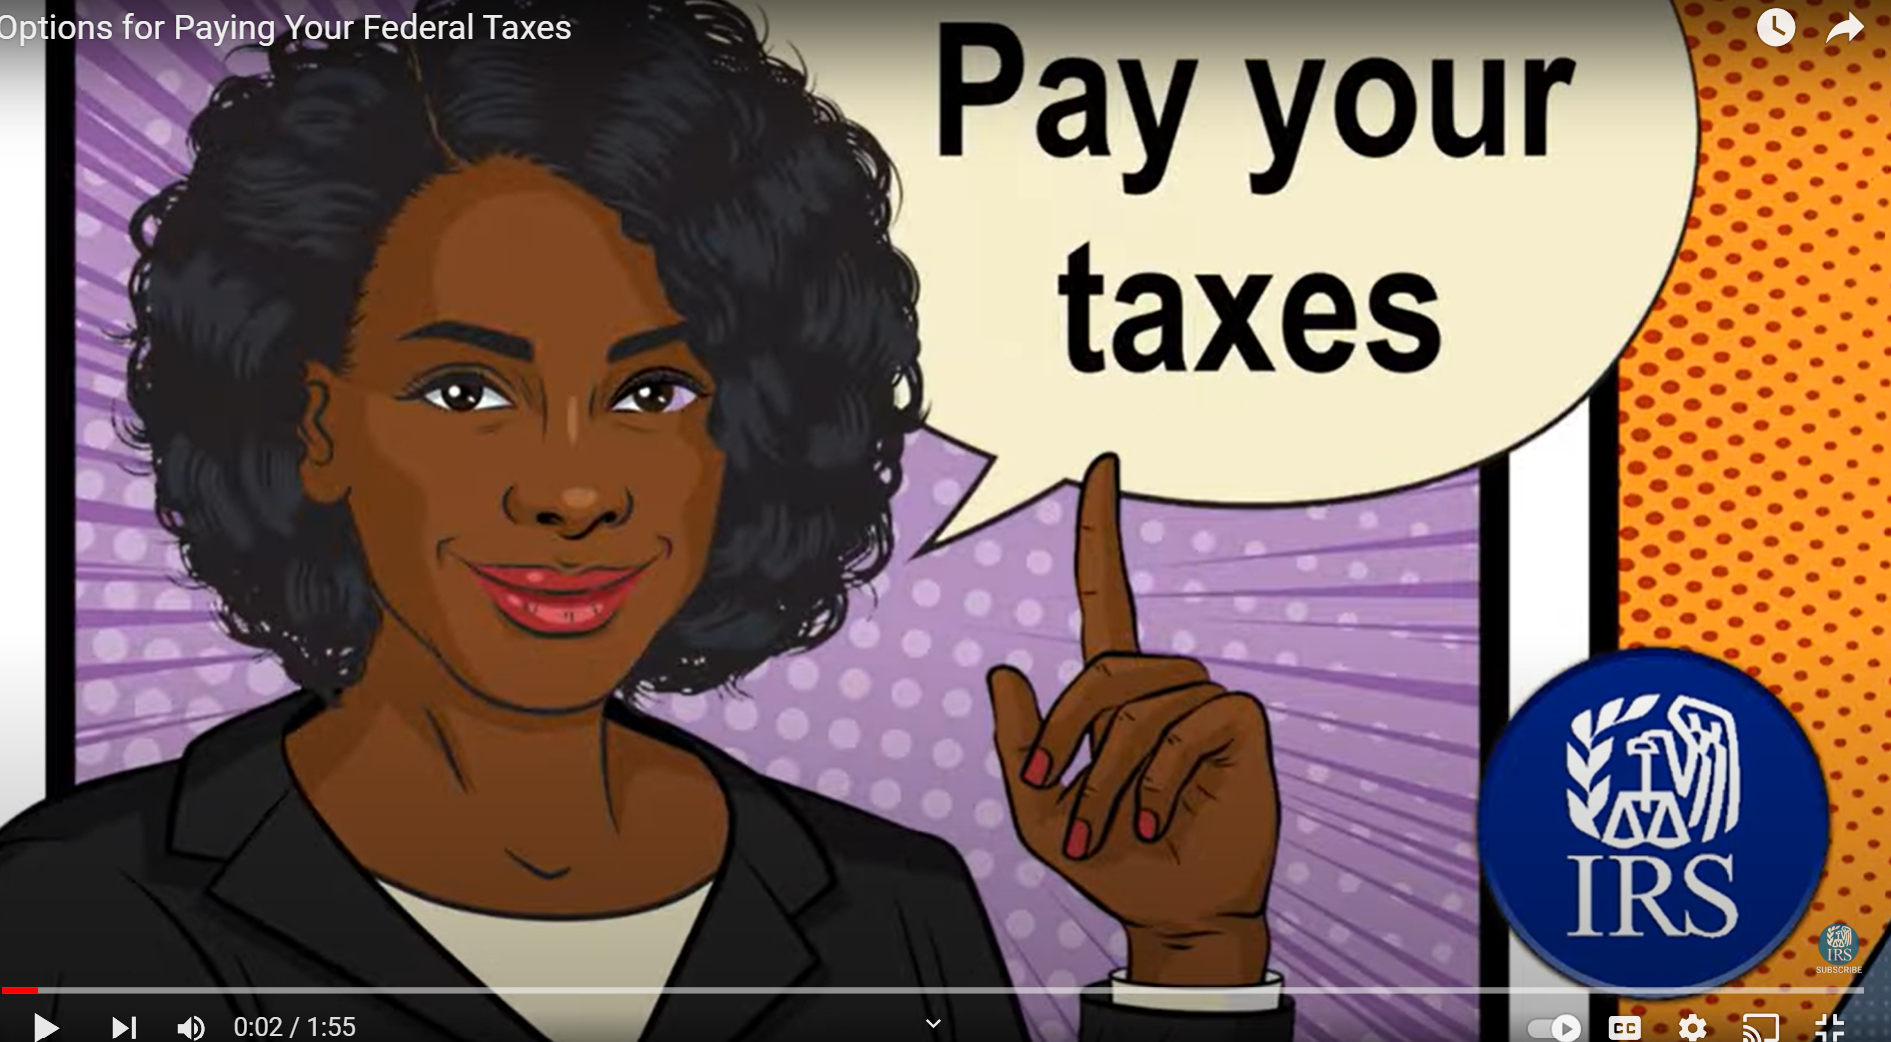 There are several ways to pay your federal taxes